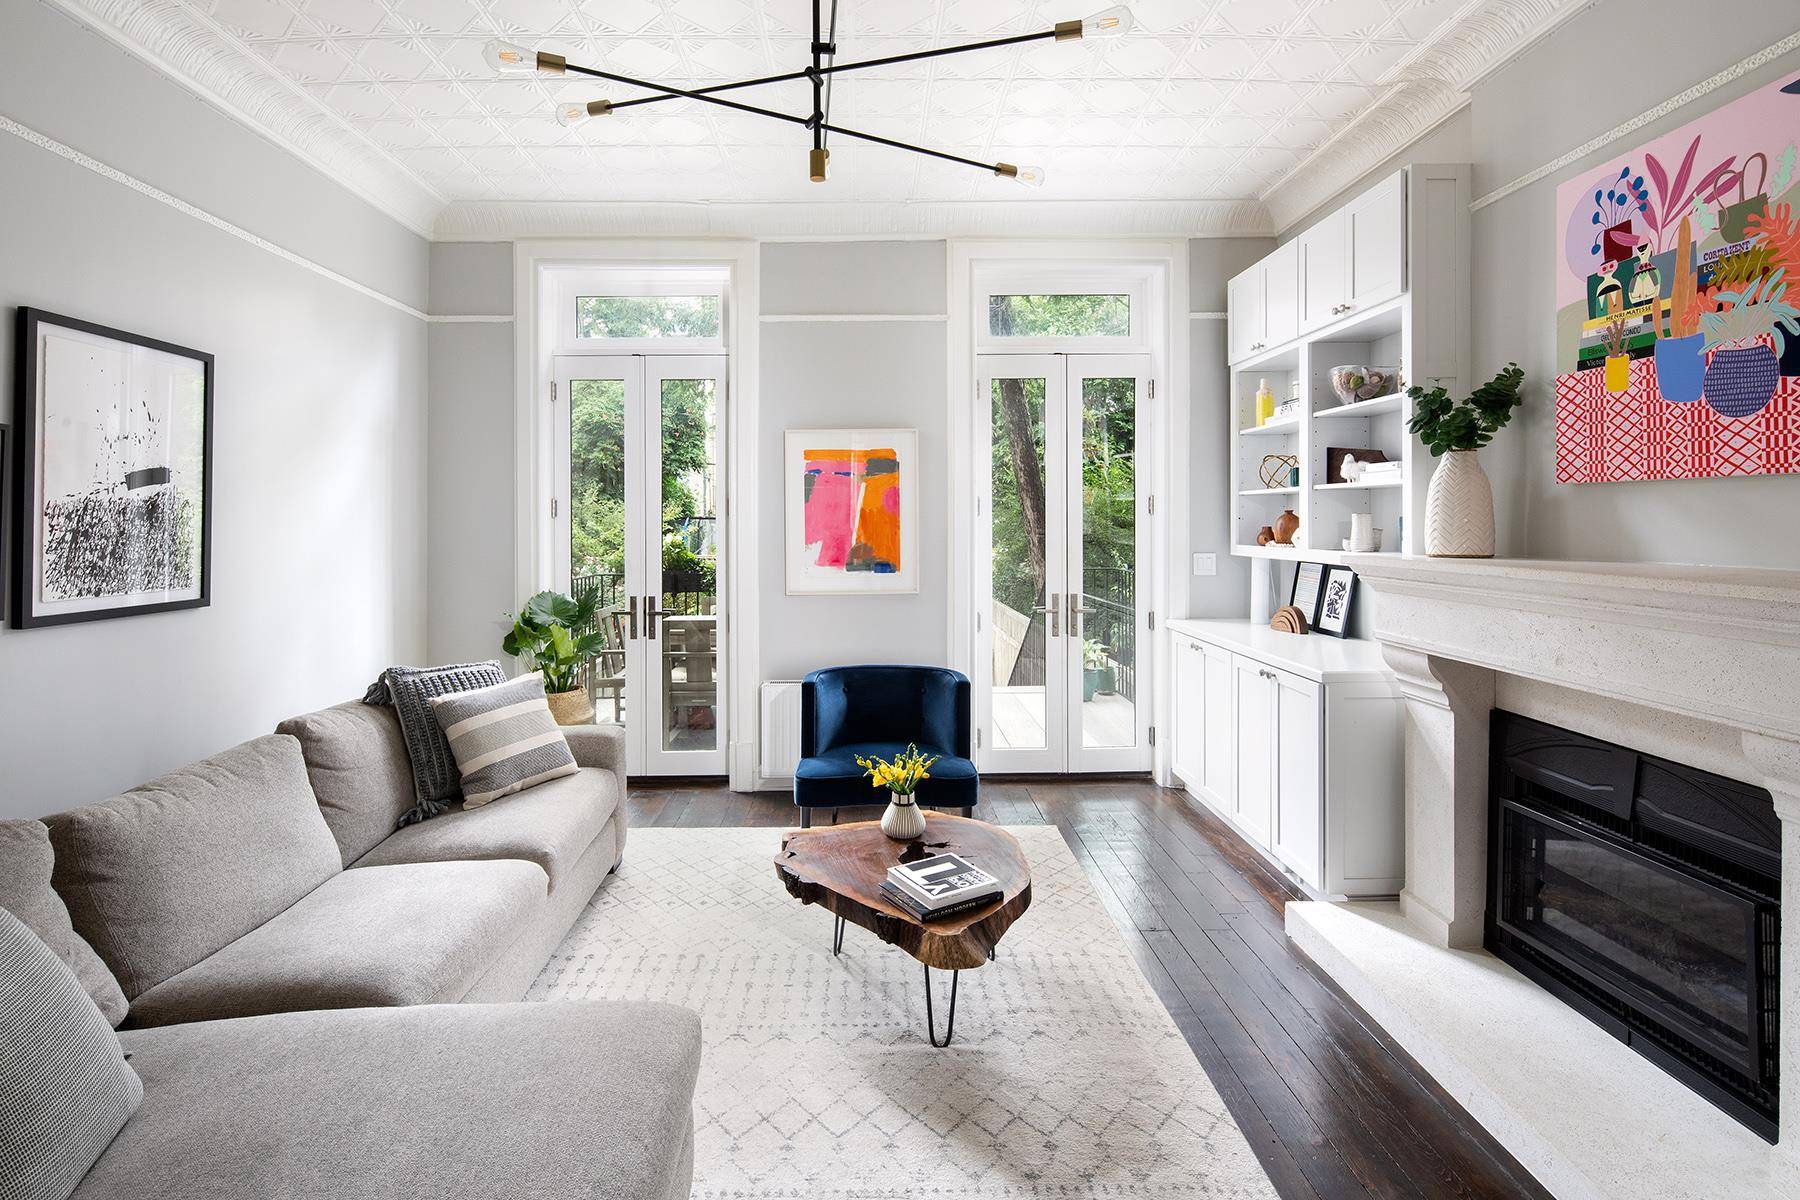 This goregeous gut renovated Carroll Gardens townhouse embraces past and present with original architectural details and bespoke modern touches that convey a relaxed elegance and quintessential Brooklyn living.